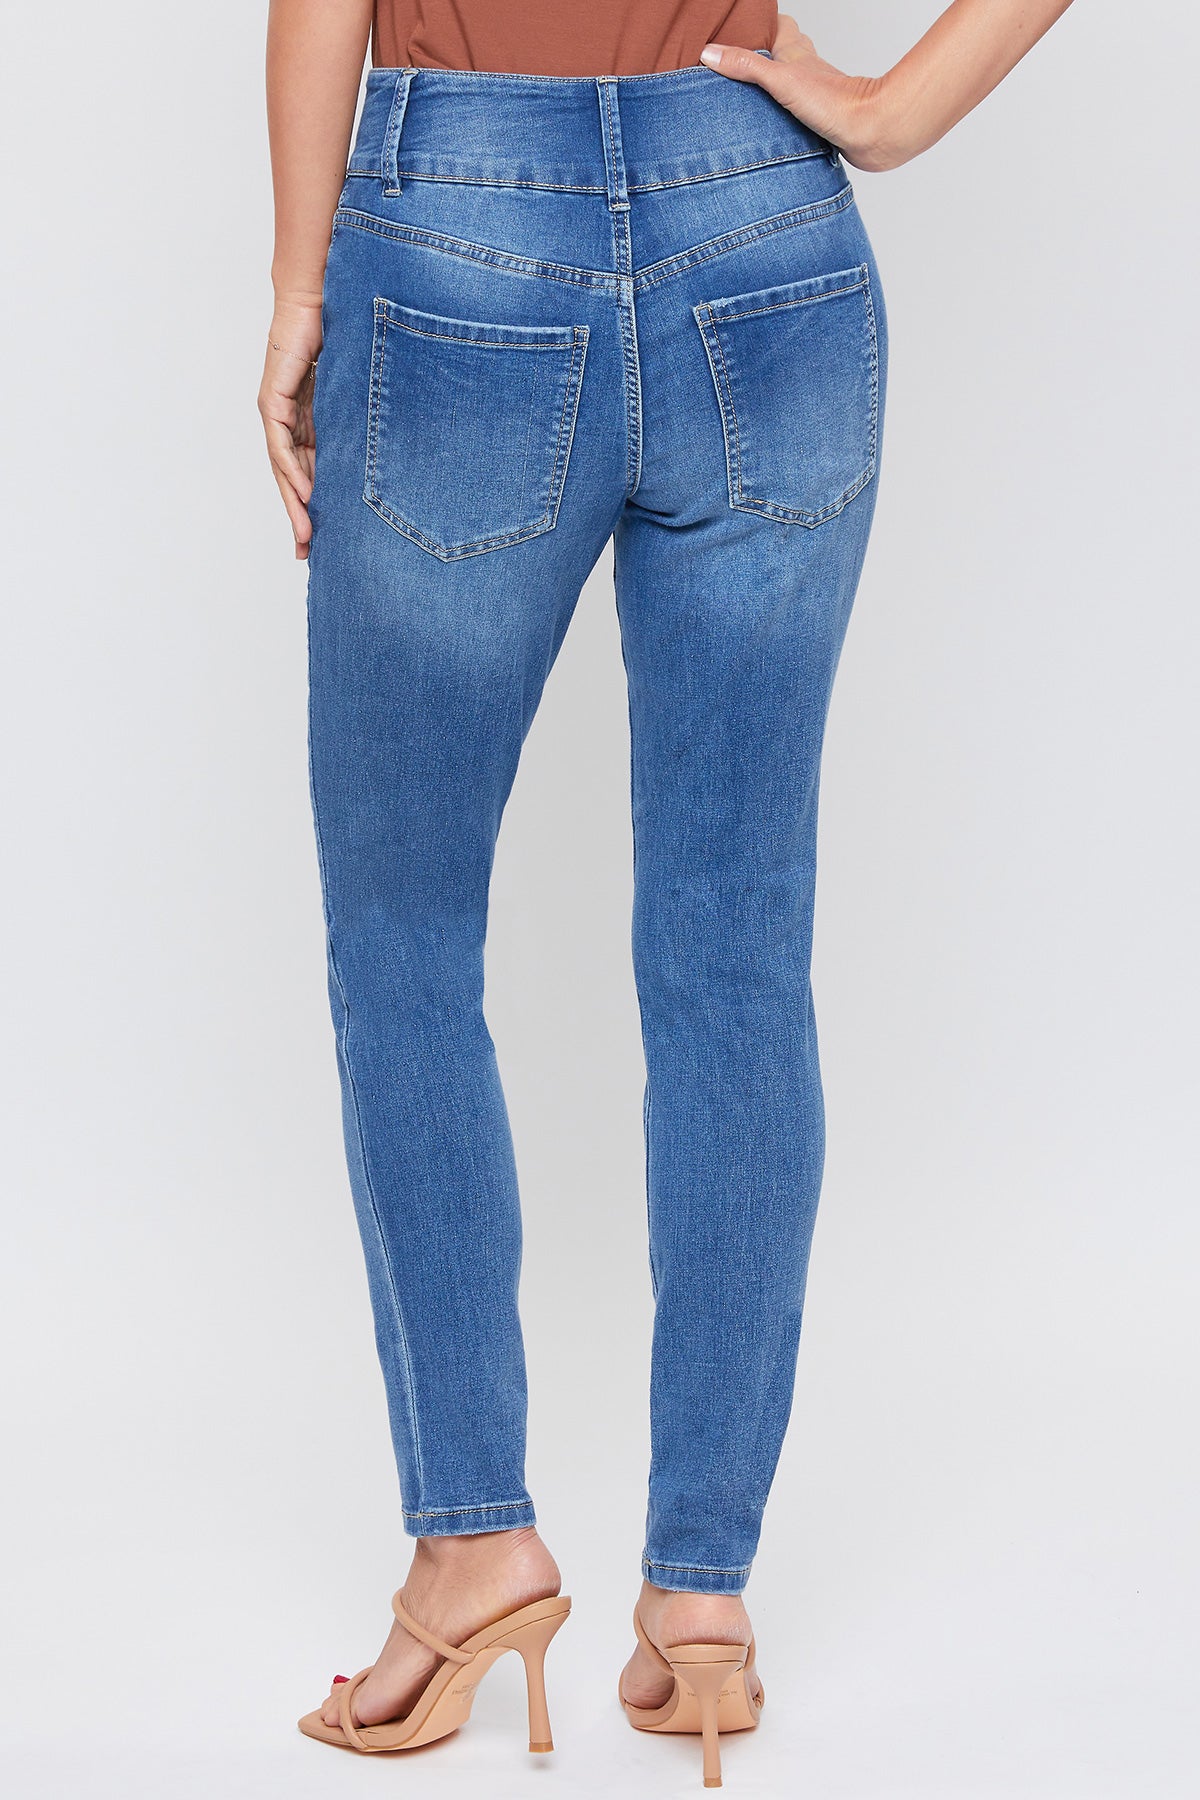 Women's Essential 3 Button High Rise Skinny Jean with Functional Front Pockets-Sale